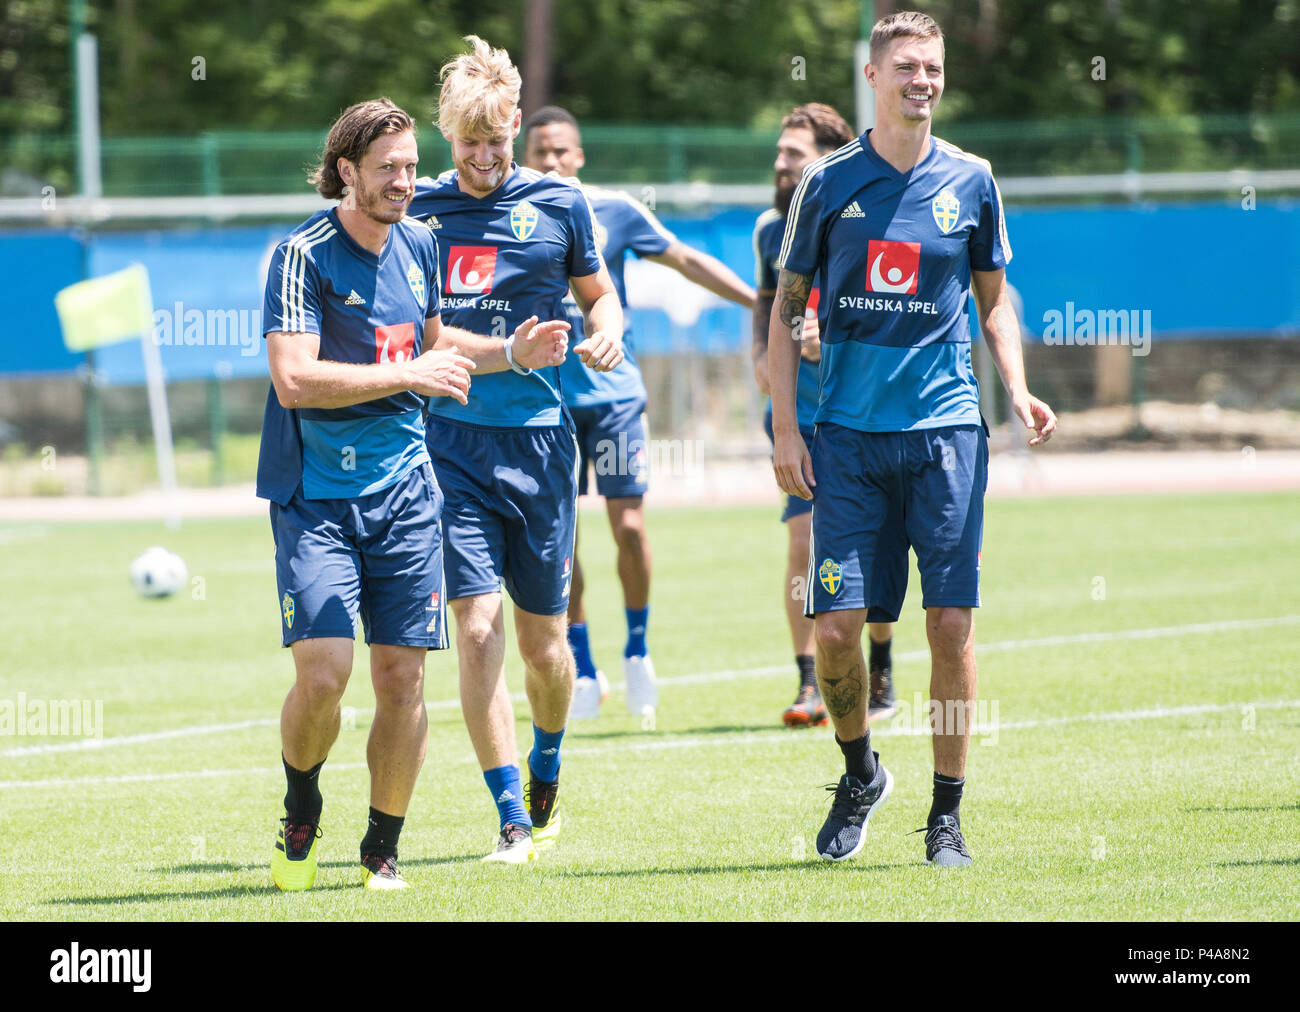 Gelendschik, Russia. 19th June, 2018. Soccer, World Cup 2018, Sweden: Gustav Svensson (l-r) runs with Filip Helander and Mikael Lustig during training of the Swedish national team across the square. The midfielder witnessed the Crimea crisis in 2014. Credit: Maximilian Haupt/dpa/Alamy Live News Stock Photo